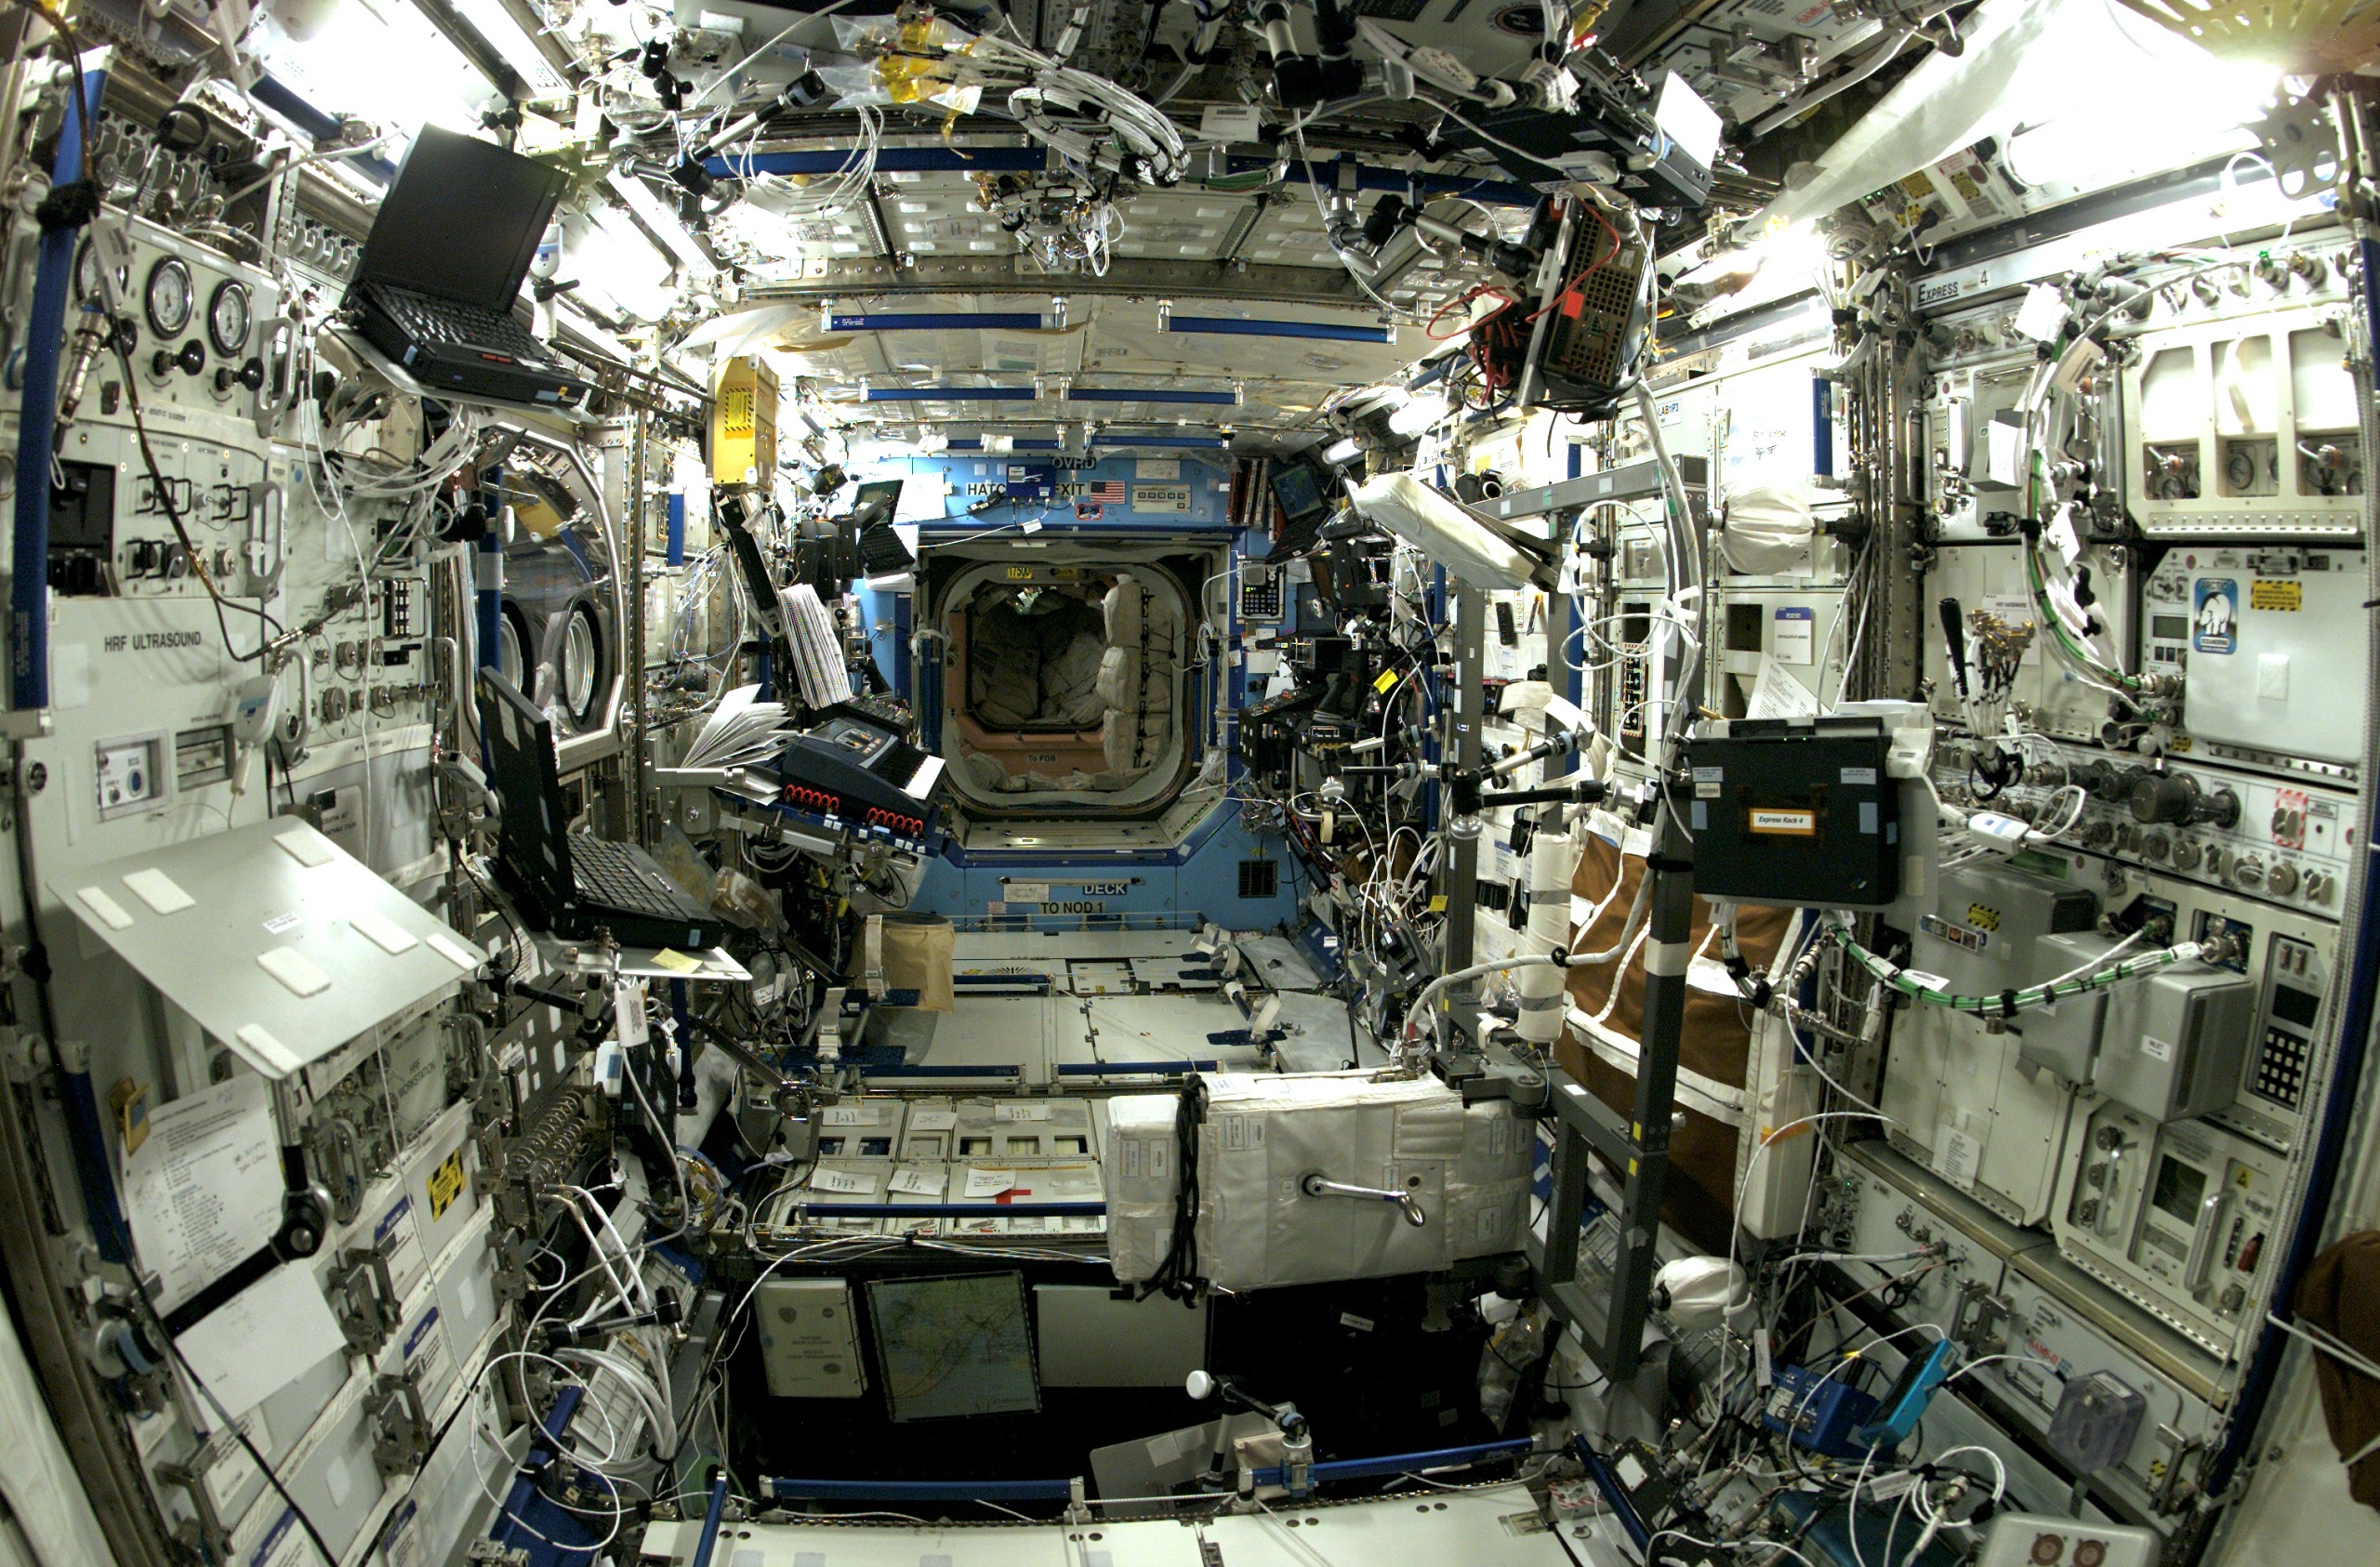 The view inside of the ISS